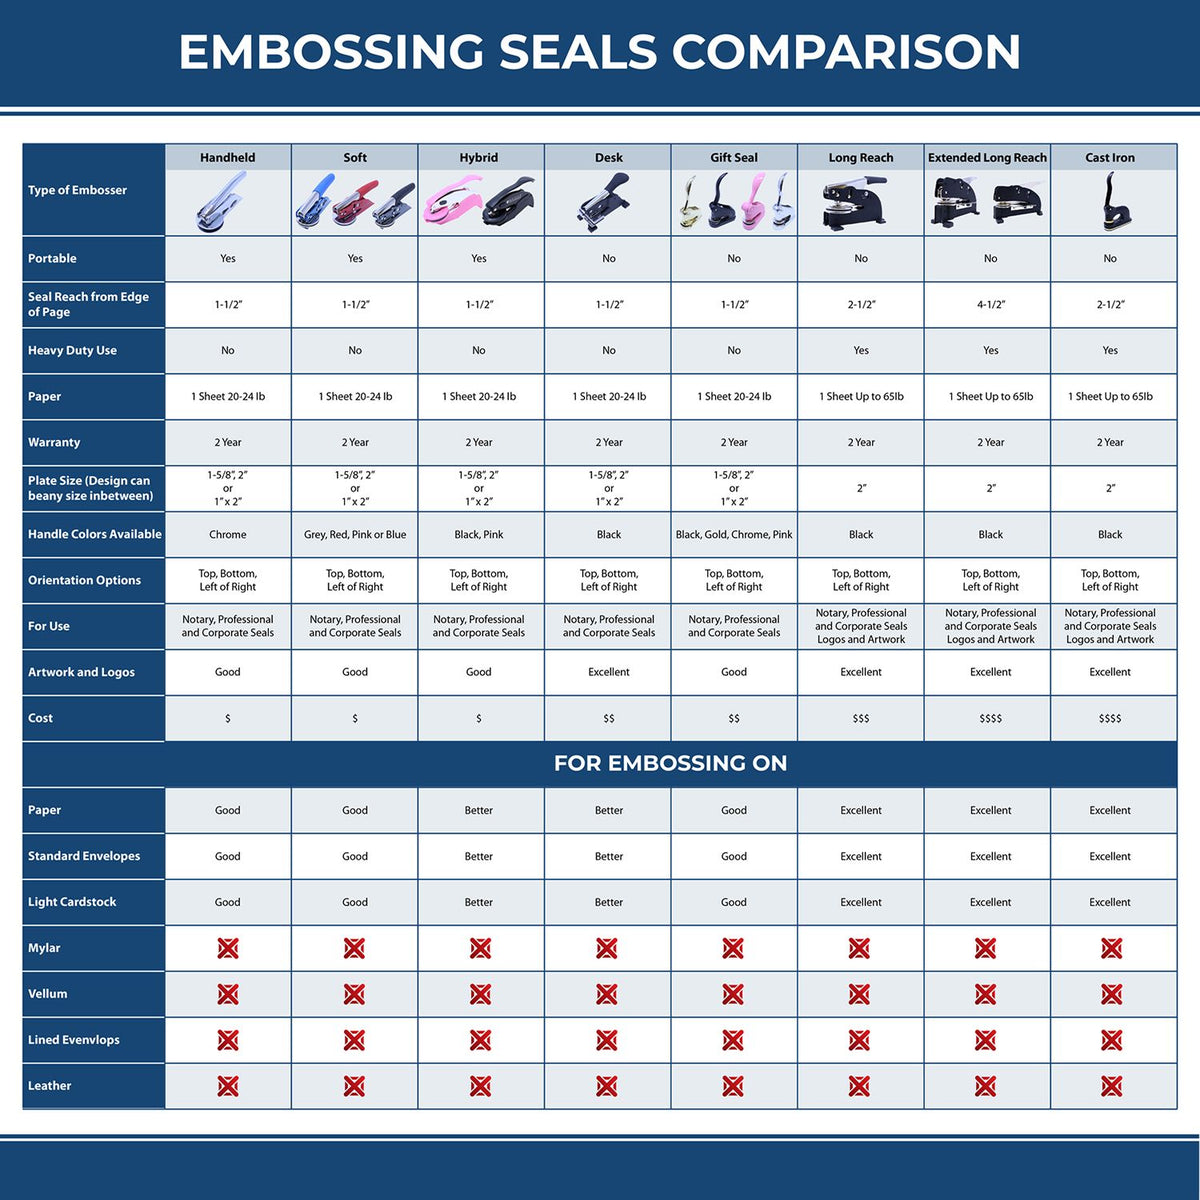 A comparison chart for the different types of mount models available for the Hybrid Kansas Land Surveyor Seal